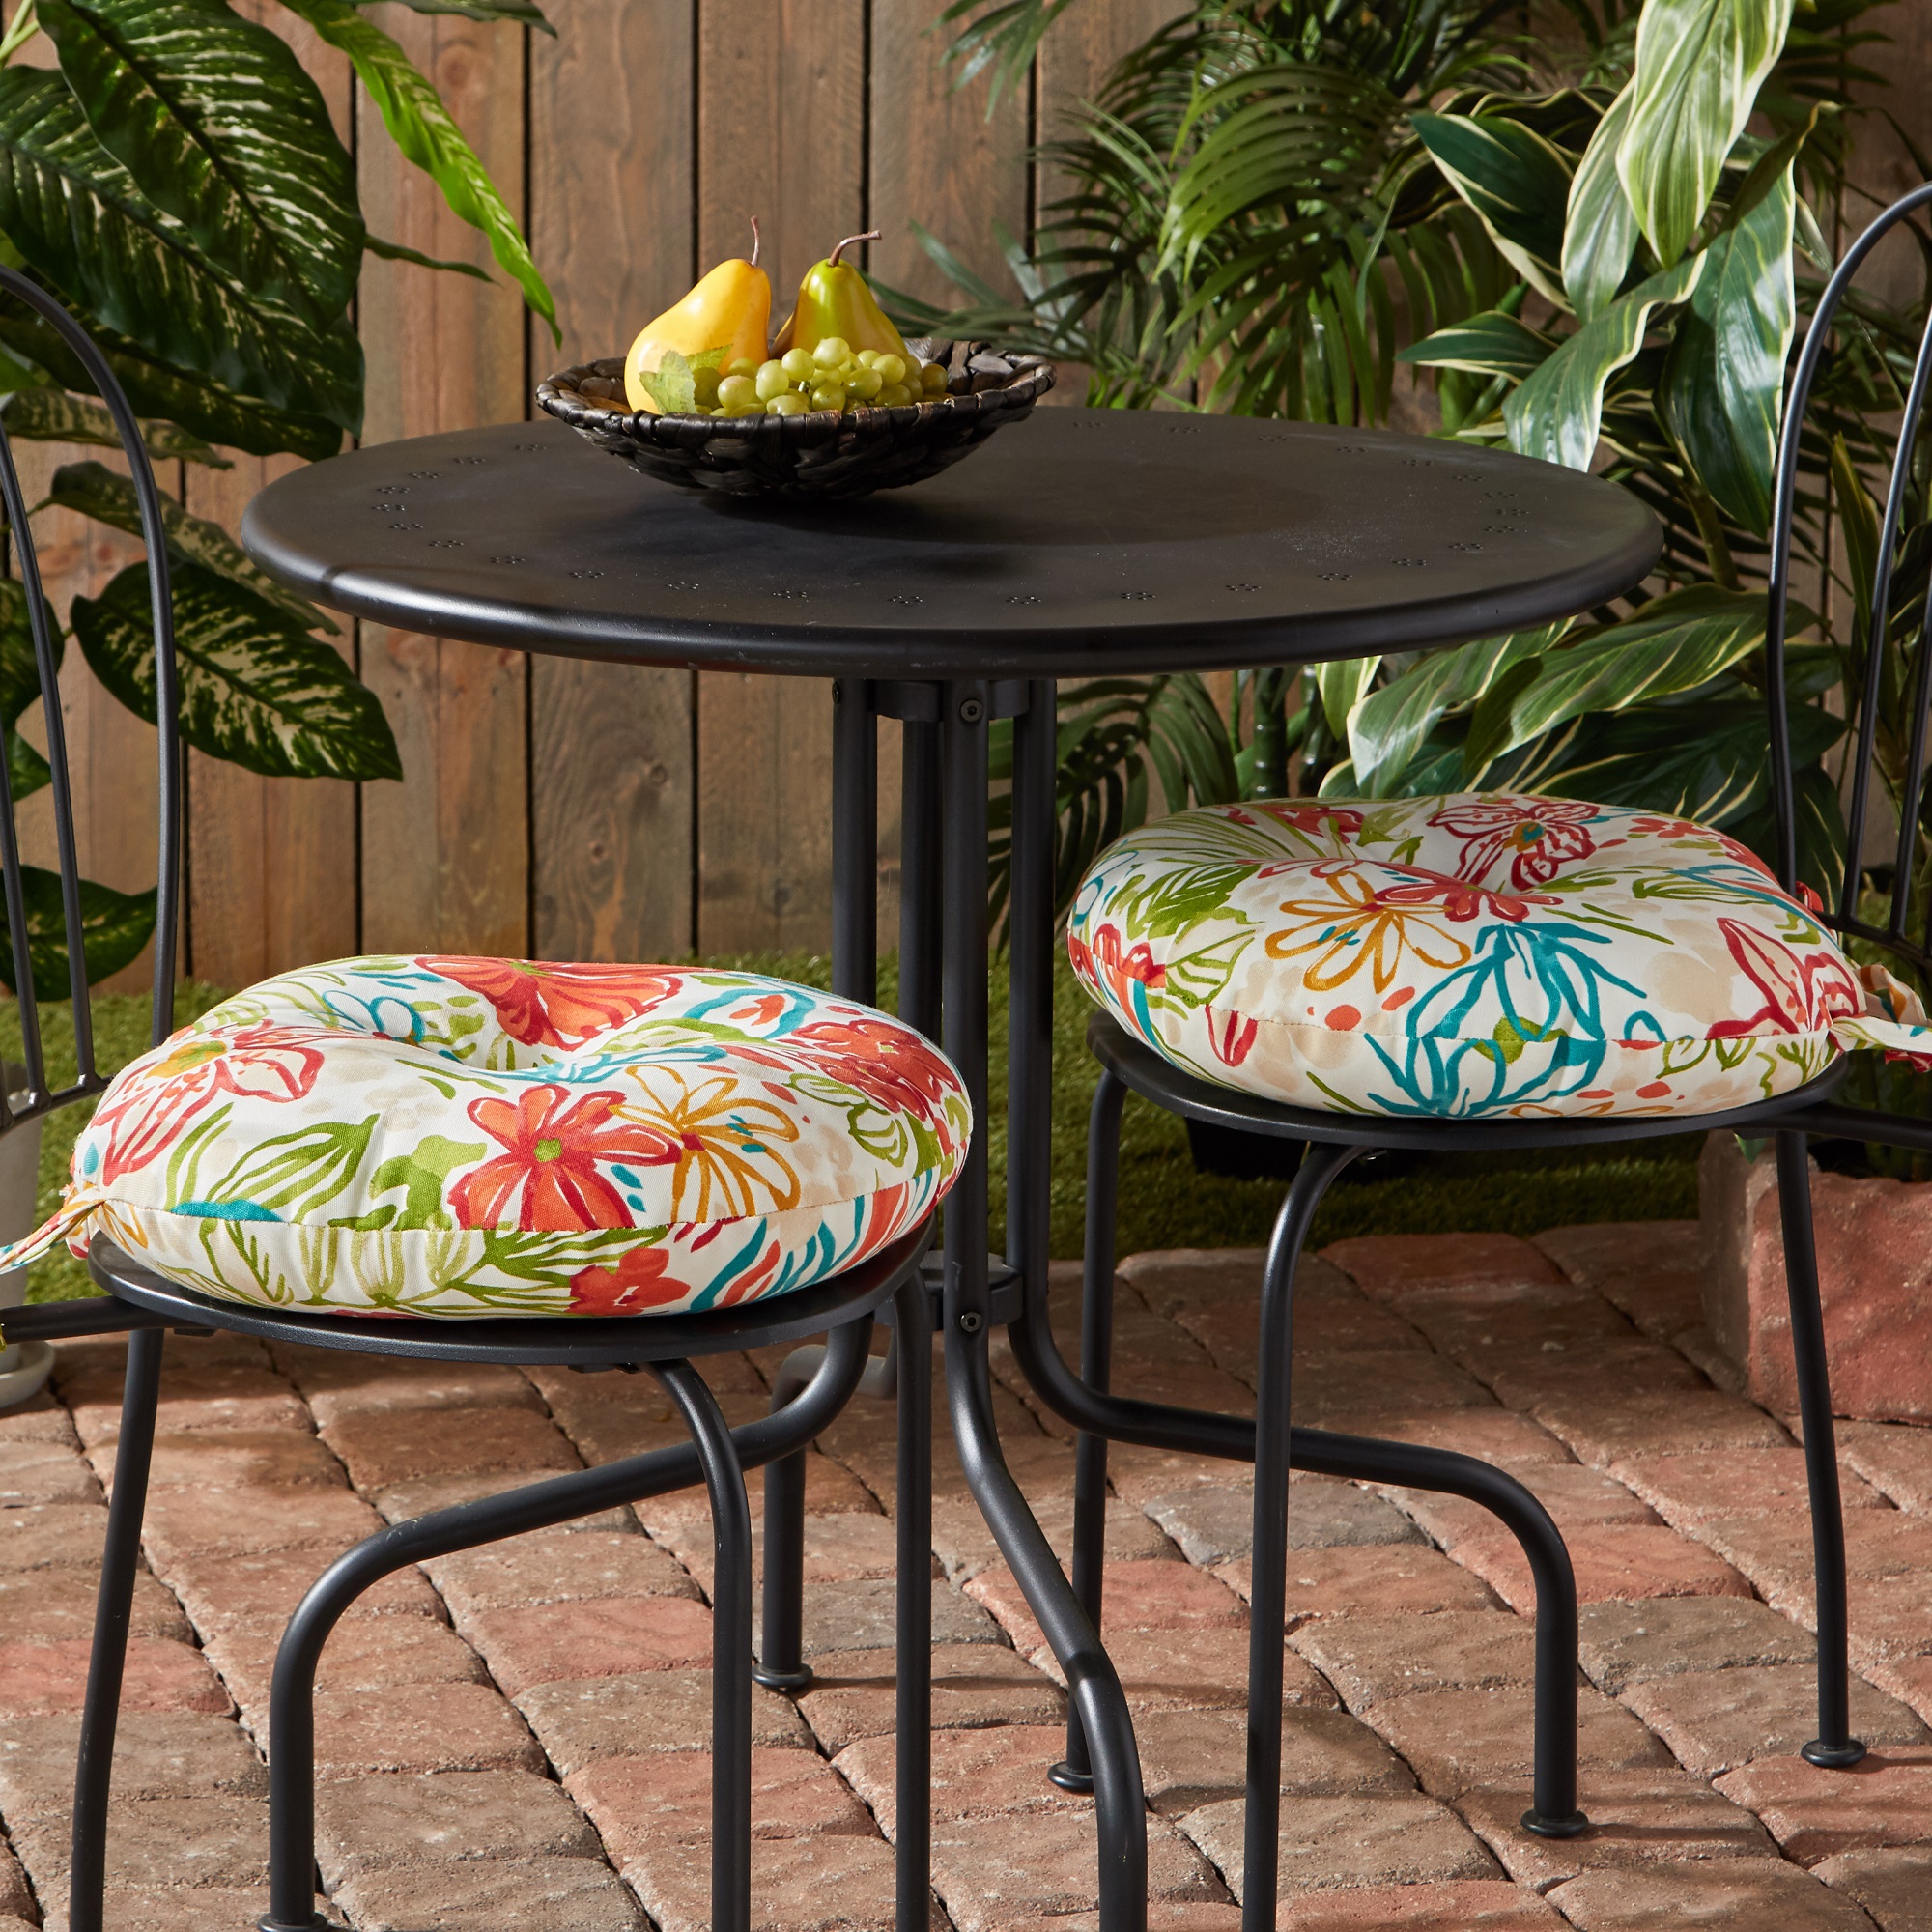 Greendale Home Fashions Breeze Floral 15 in. Round Outdoor Reversible Bistro Seat Cushion (Set of 2) - image 5 of 7